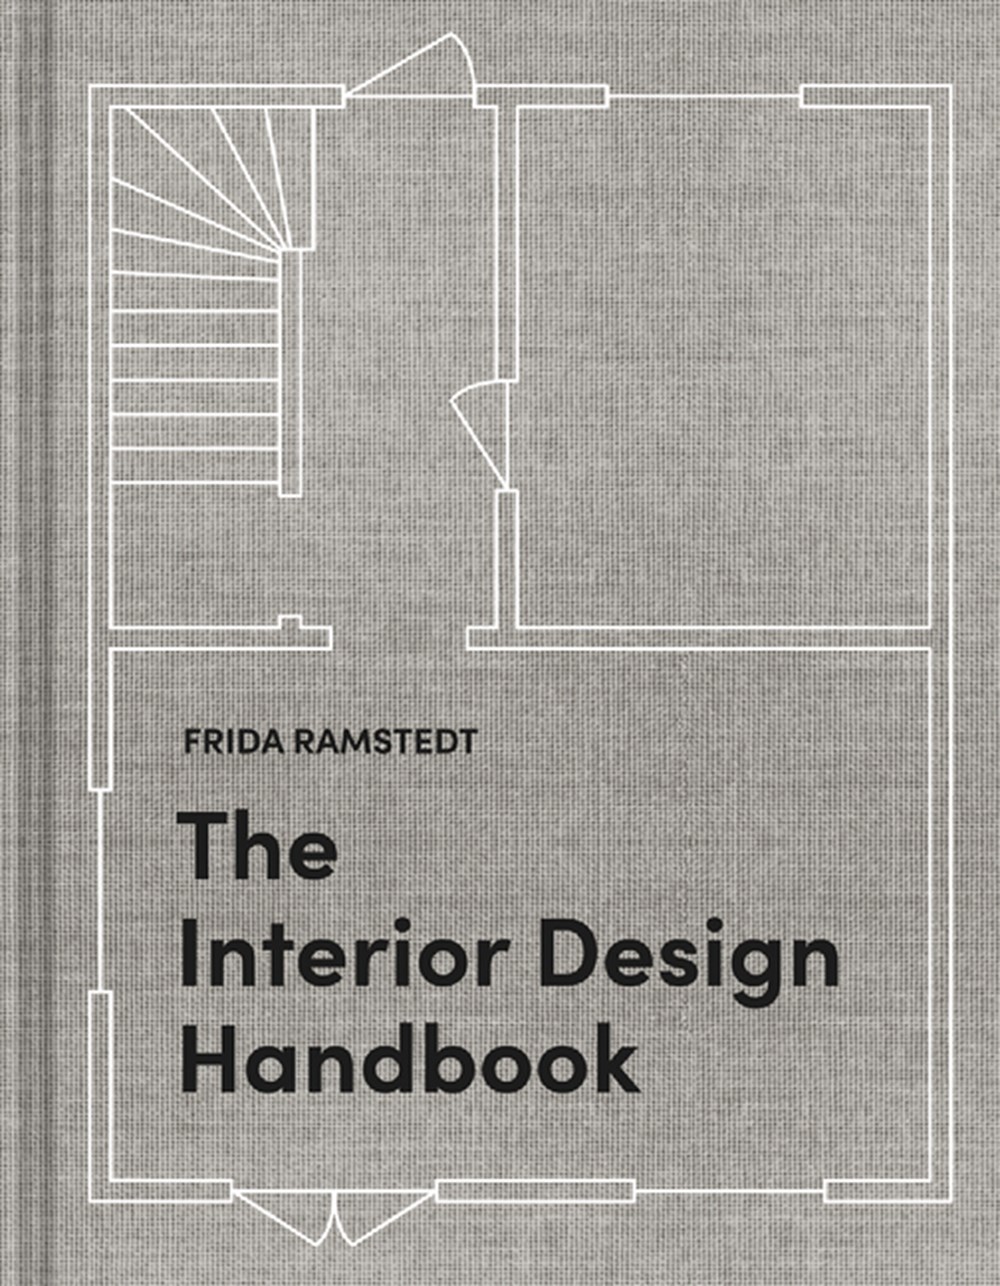 Interior Design Handbook: Furnish, Decorate, and Style Your Space